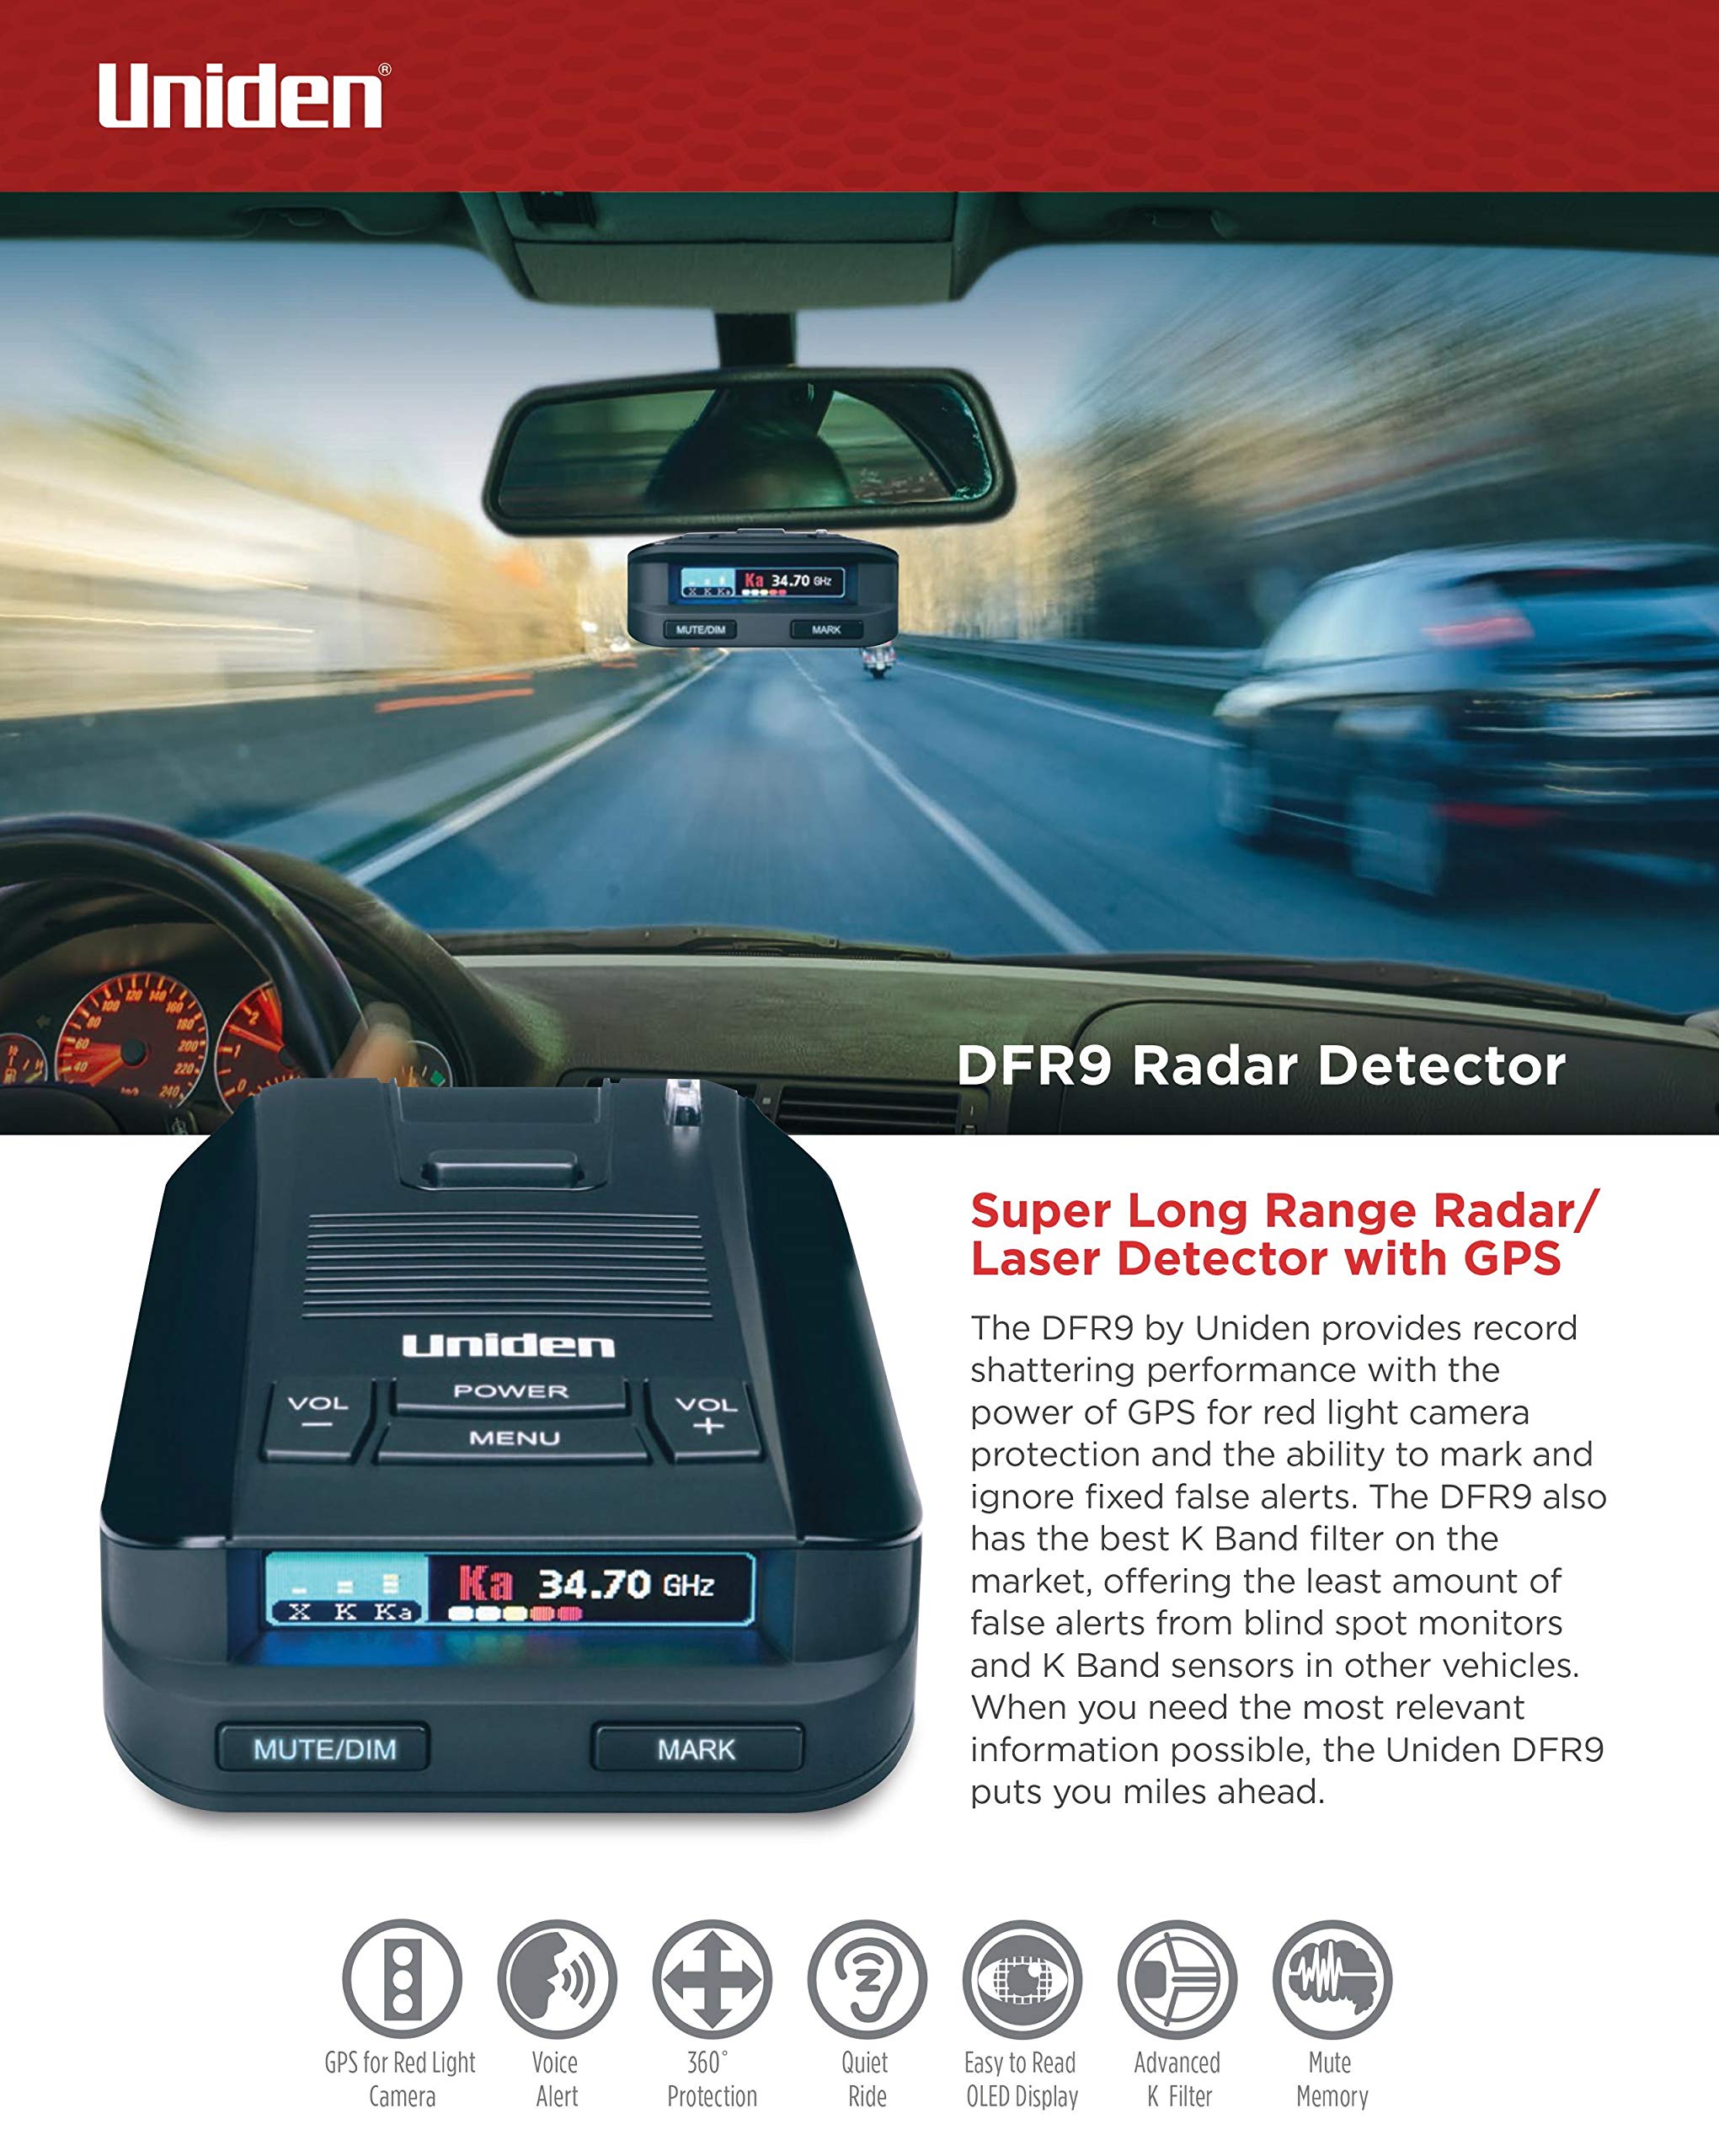 Uniden DFR9 Super Long Range Laser and Radar Detection, Built-In GPS for Red Light Cameras and Speed Camera Alerts, Easy to Read Full Color OLED Display